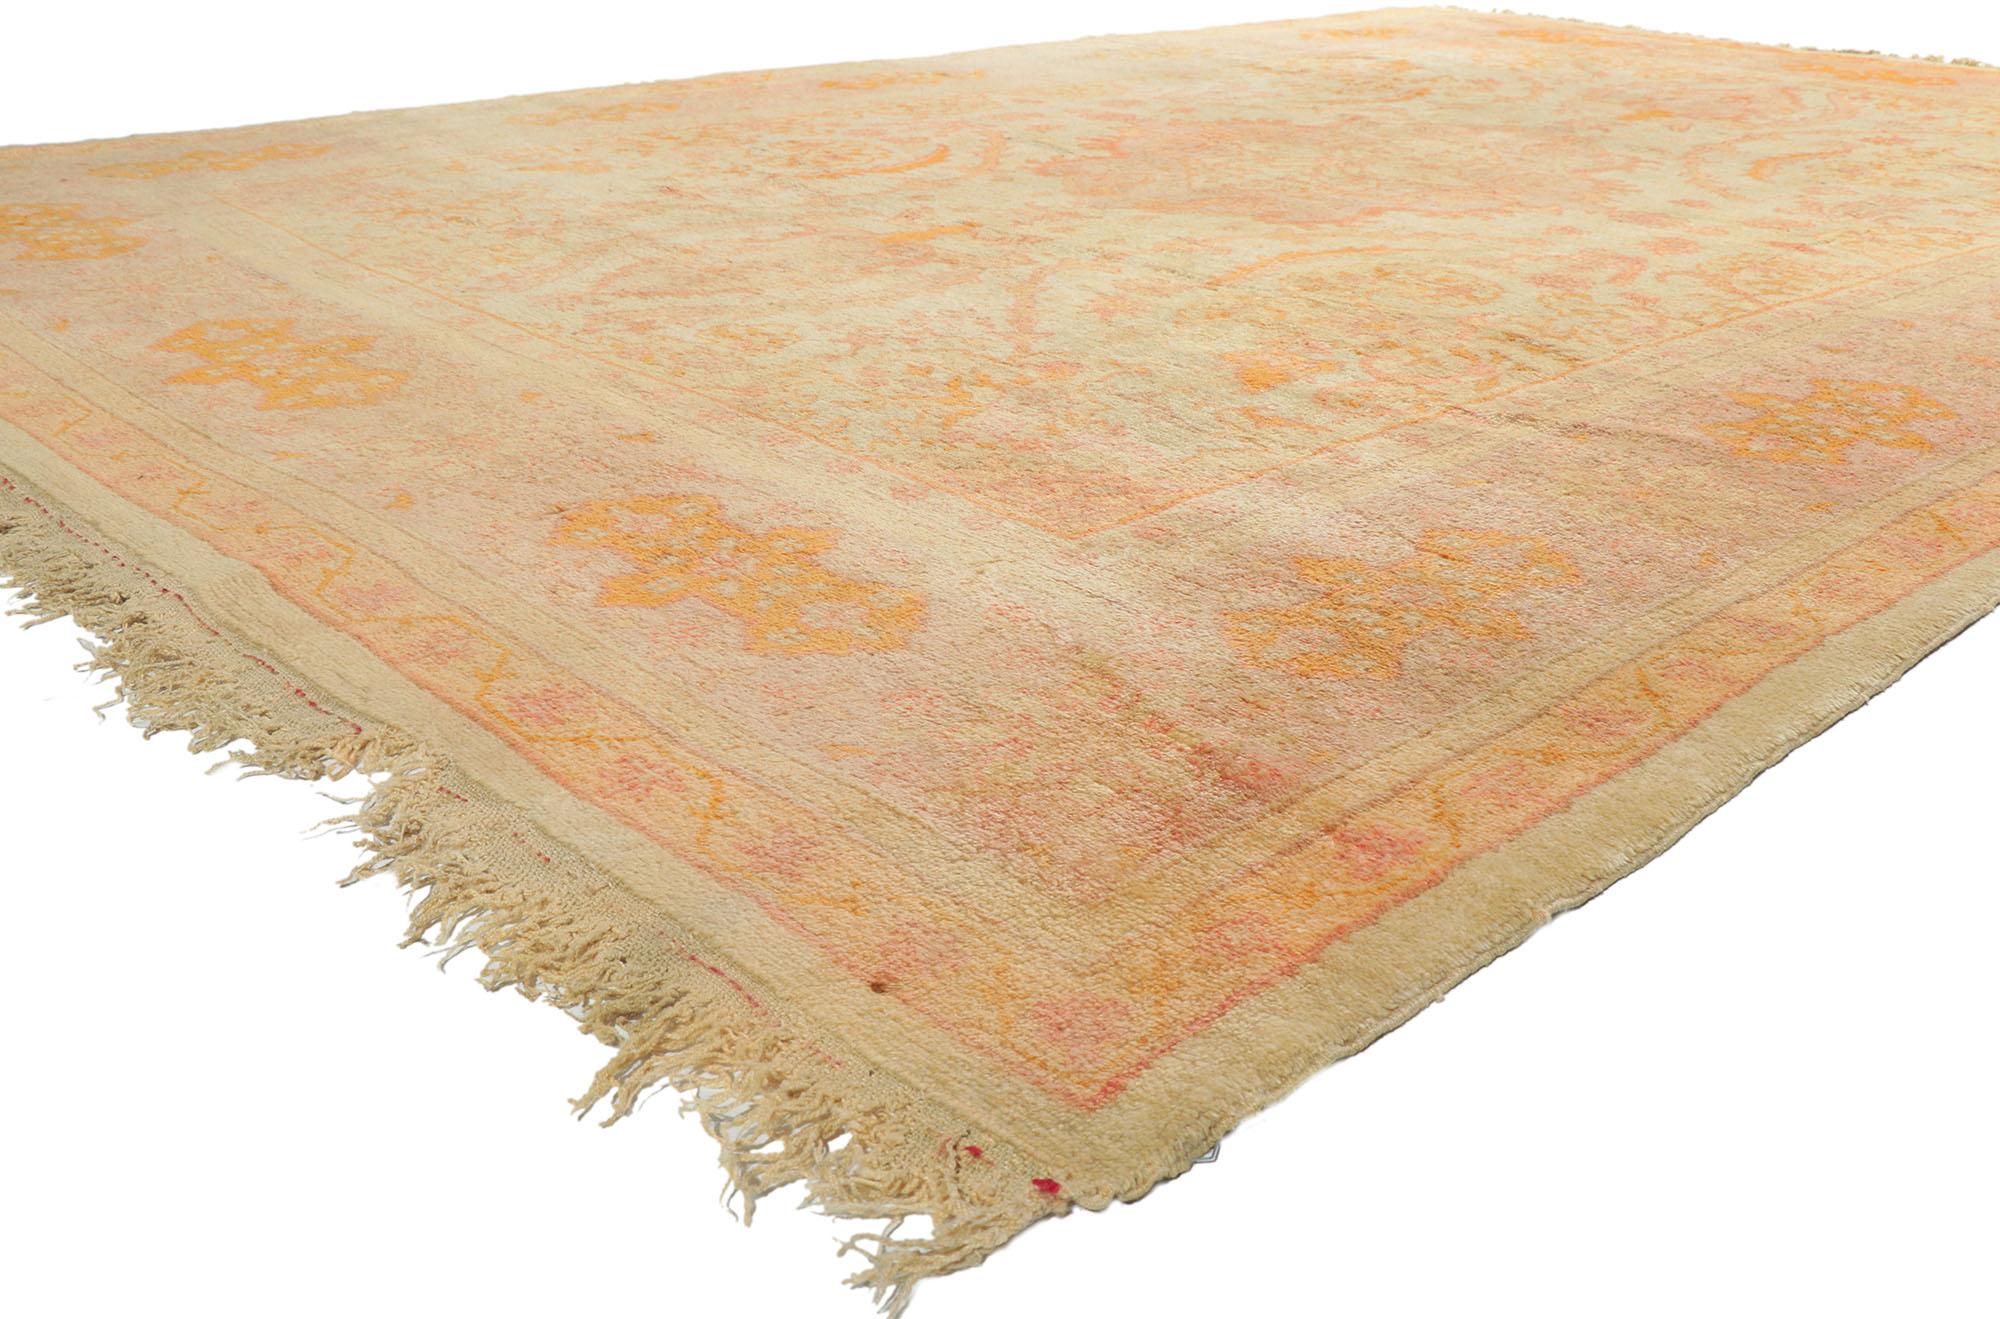 78159 antique Turkish Oushak rug, 10'02 x 14'07. With its effortless beauty and timeless design, this hand knotted wool antique Turkish Oushak rug is poised to impress. Featuring a botanical center medallion anchored with palmette pendants on either